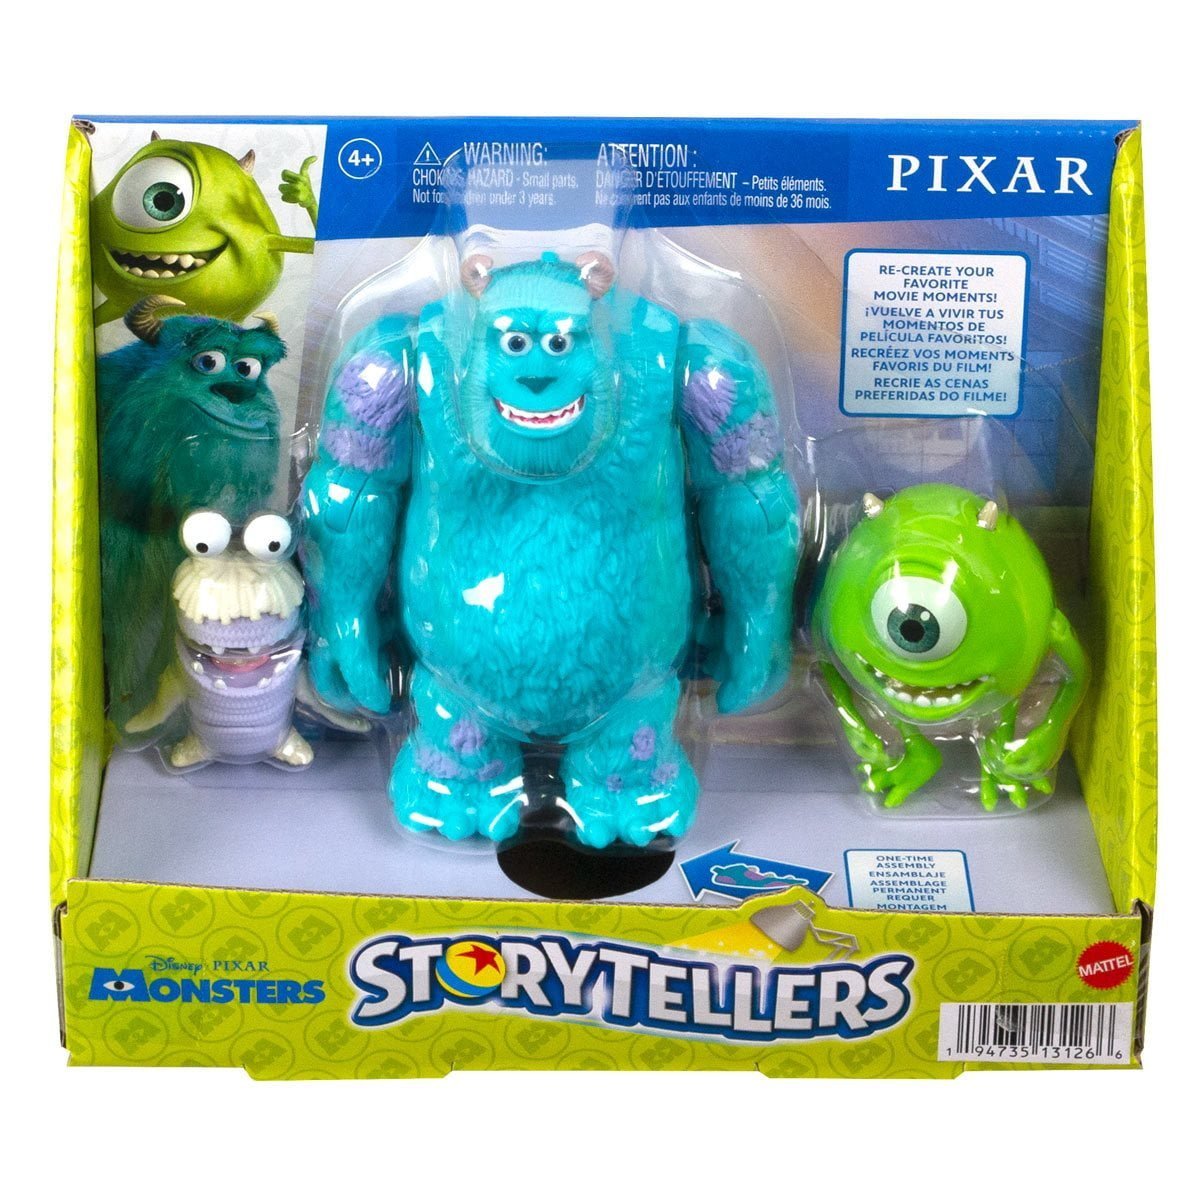  Mattel Disney and Pixar Monsters, Inc Storyteller 3 Action  Figure Pack, Sulley Mike & Boo Characters in Get Boo Home Pack, Authentic  Toys at 3 Inch Scale : Toys & Games